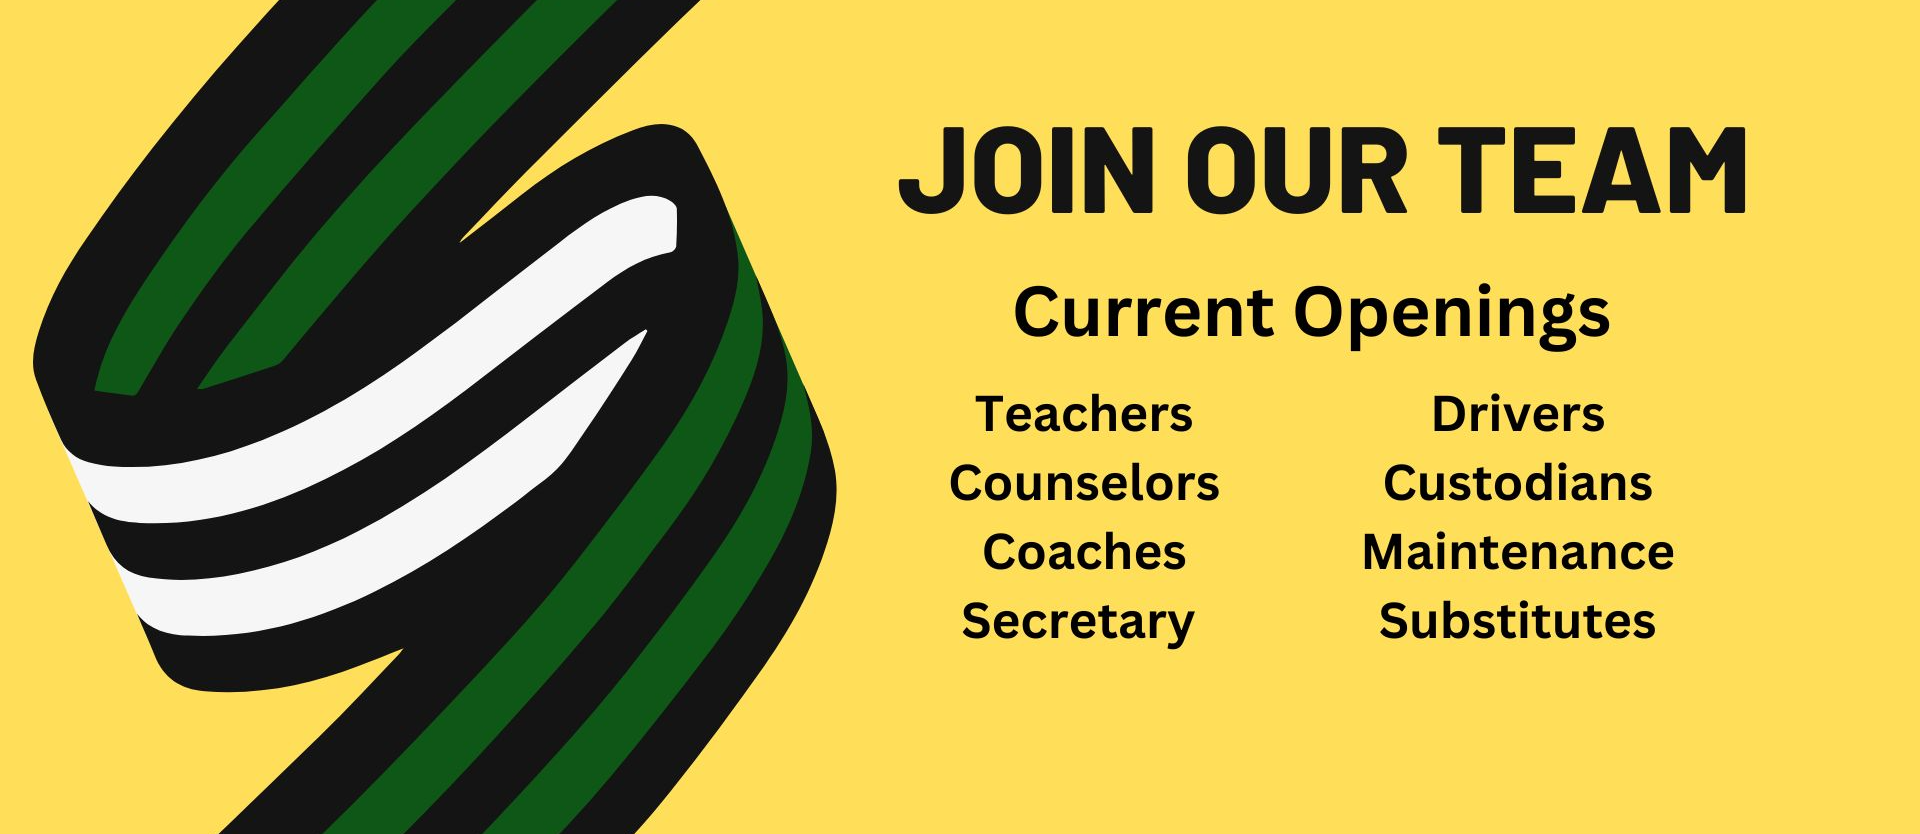 Join our team Current openings Teachers, Coaches, Counselors, Secretary, Drivers, Maintenance, Custodians, Substitutes